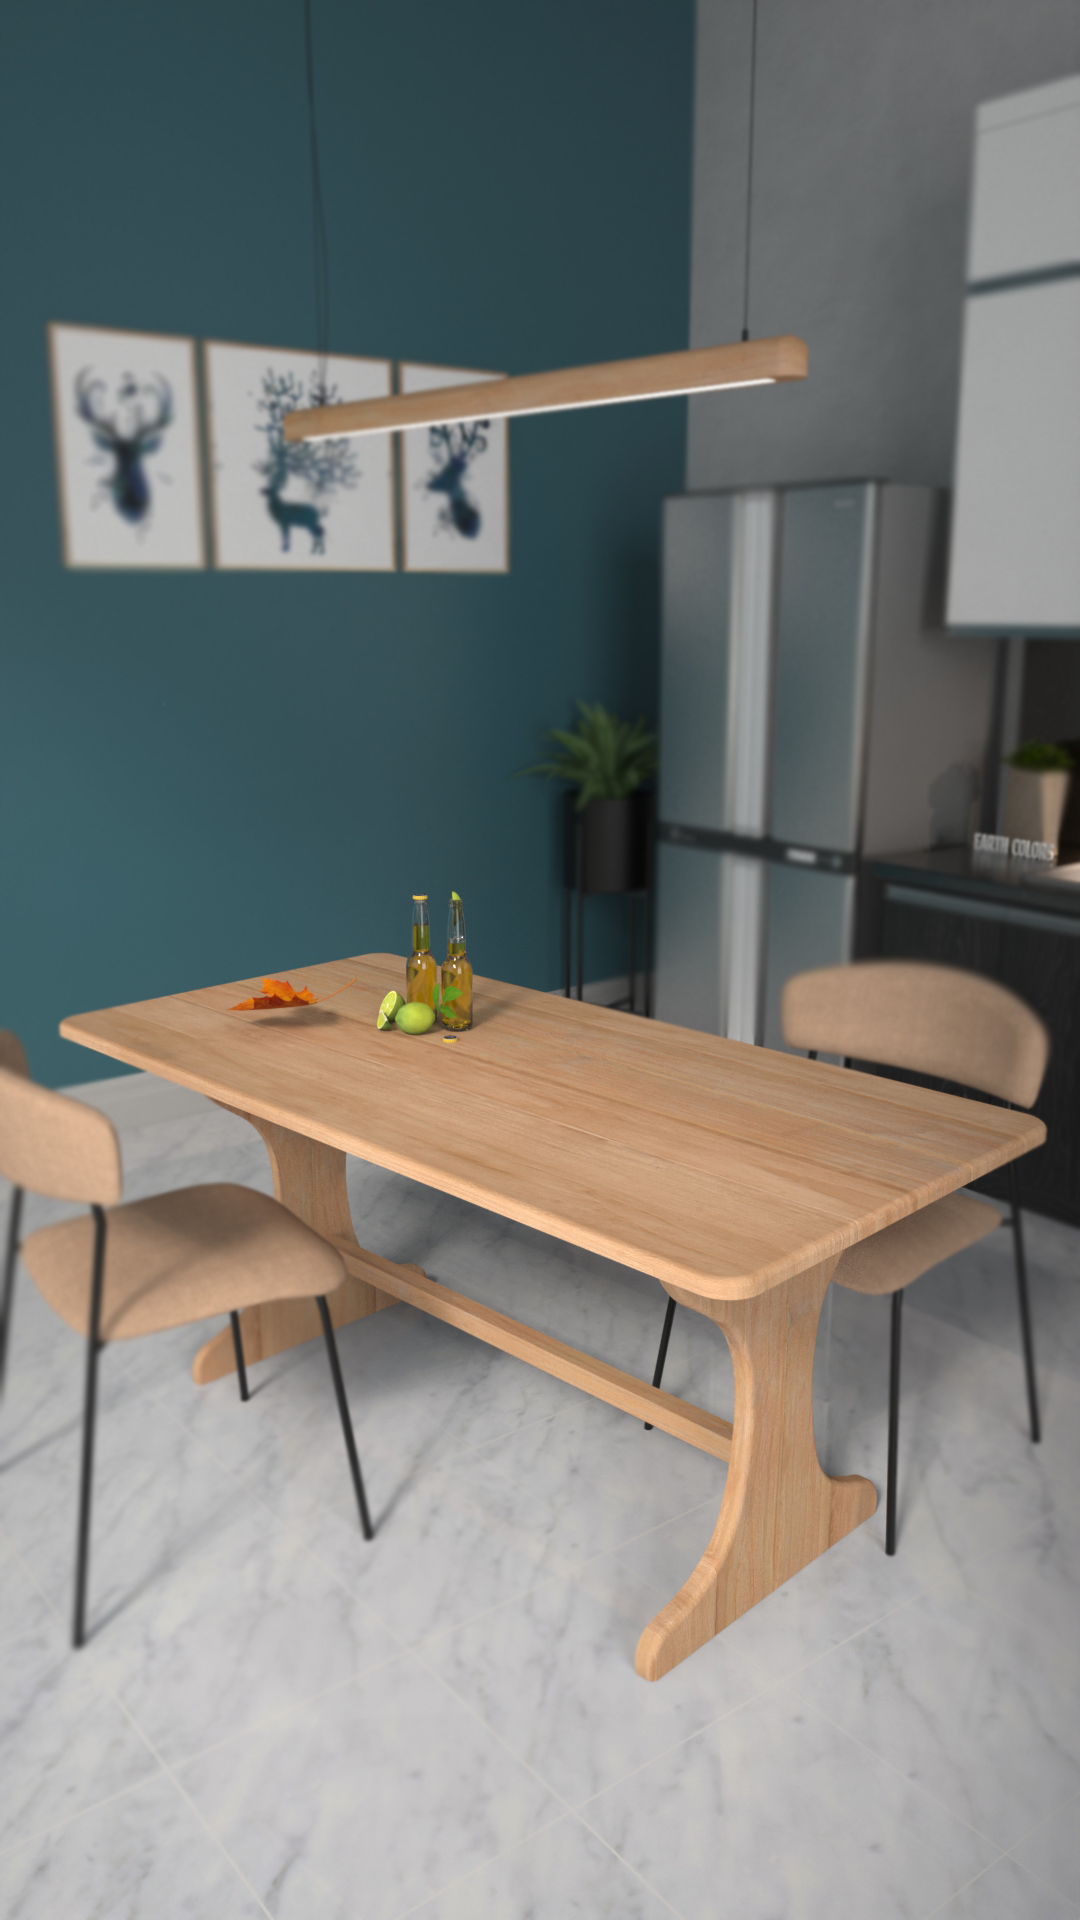 Small wood kitchen tables